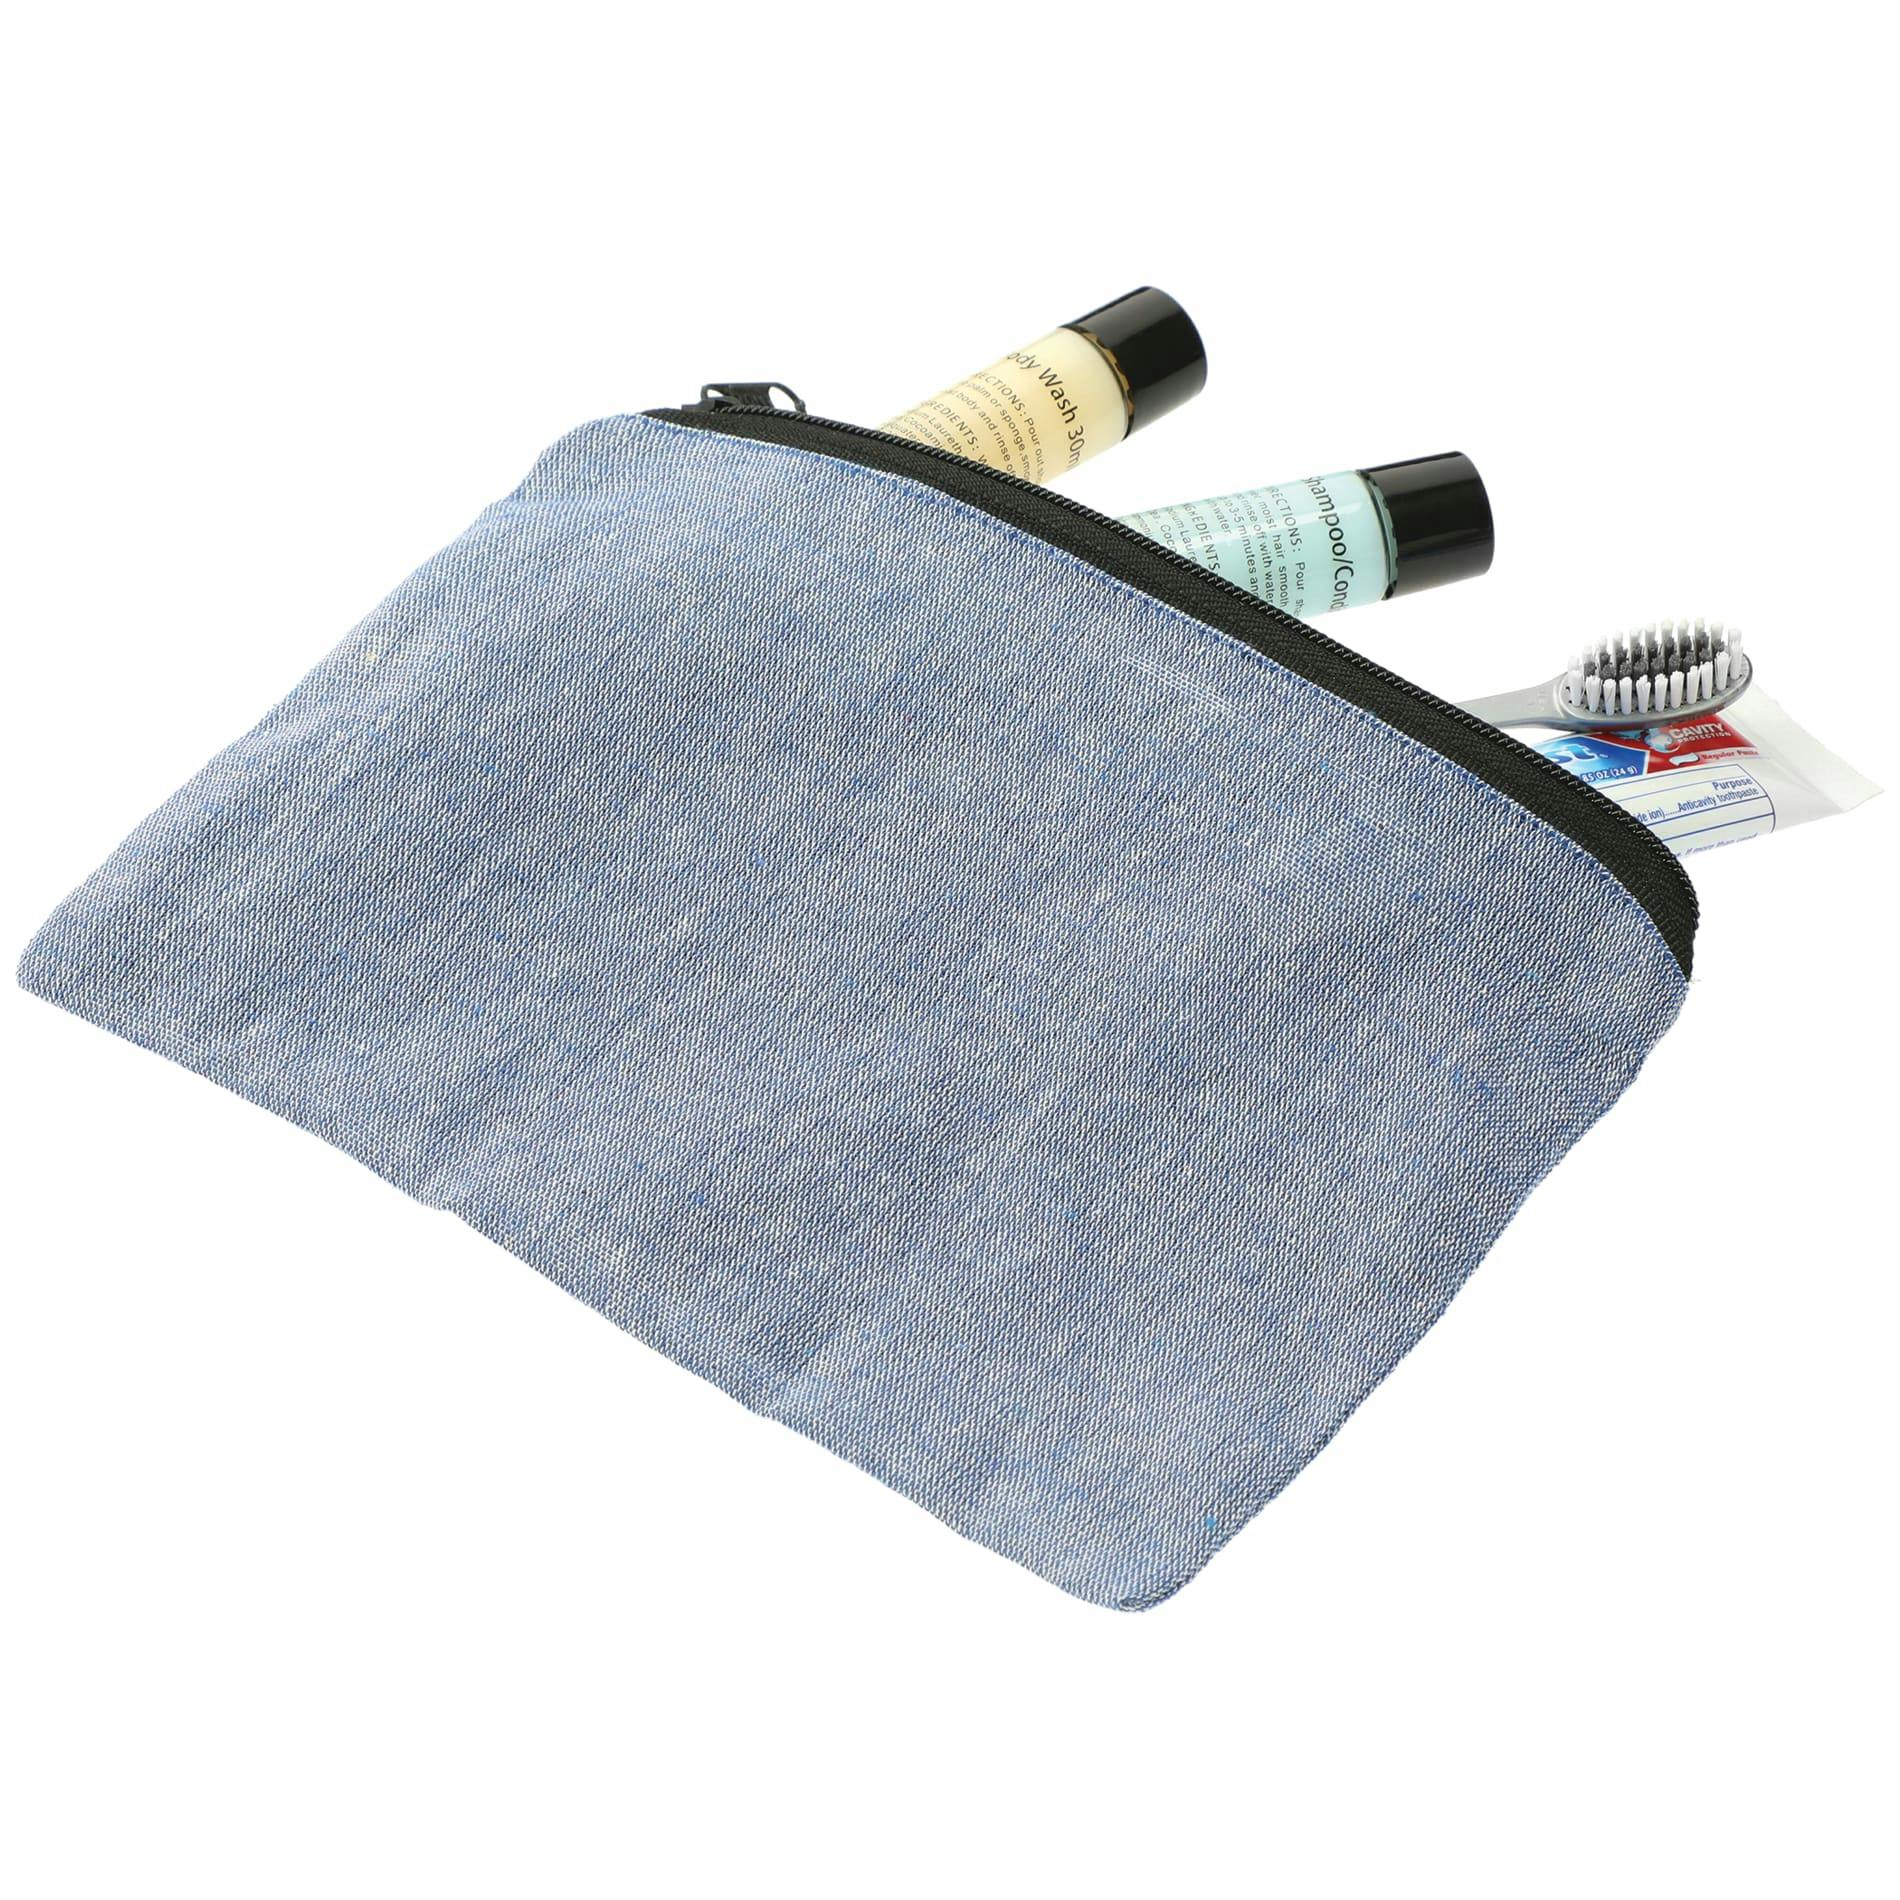 Recycled 5oz Cotton Twill Pouch - additional Image 3